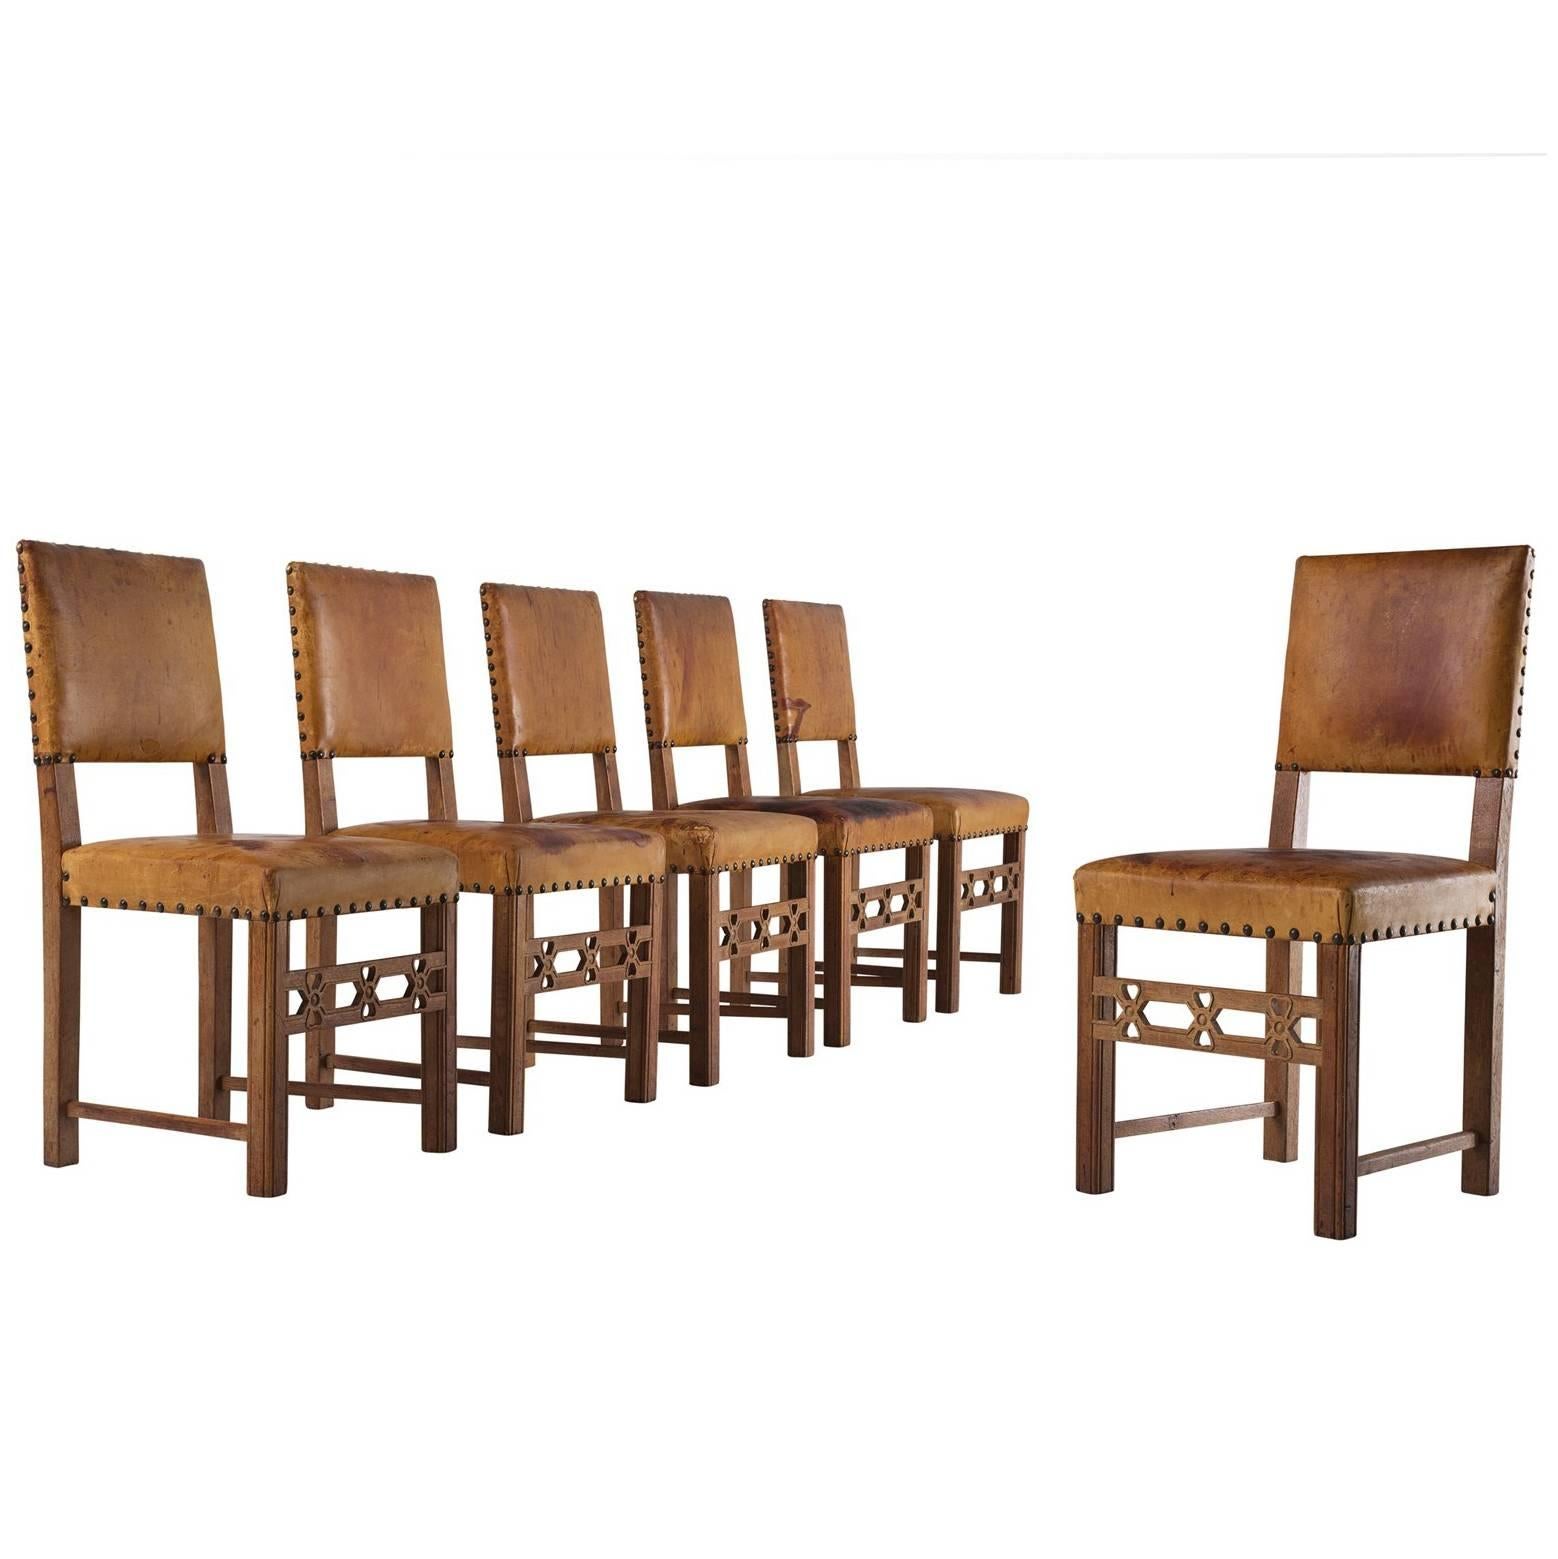 Set of Six Swedish Dining Chairs in Oak and Patinated Cognac Leather